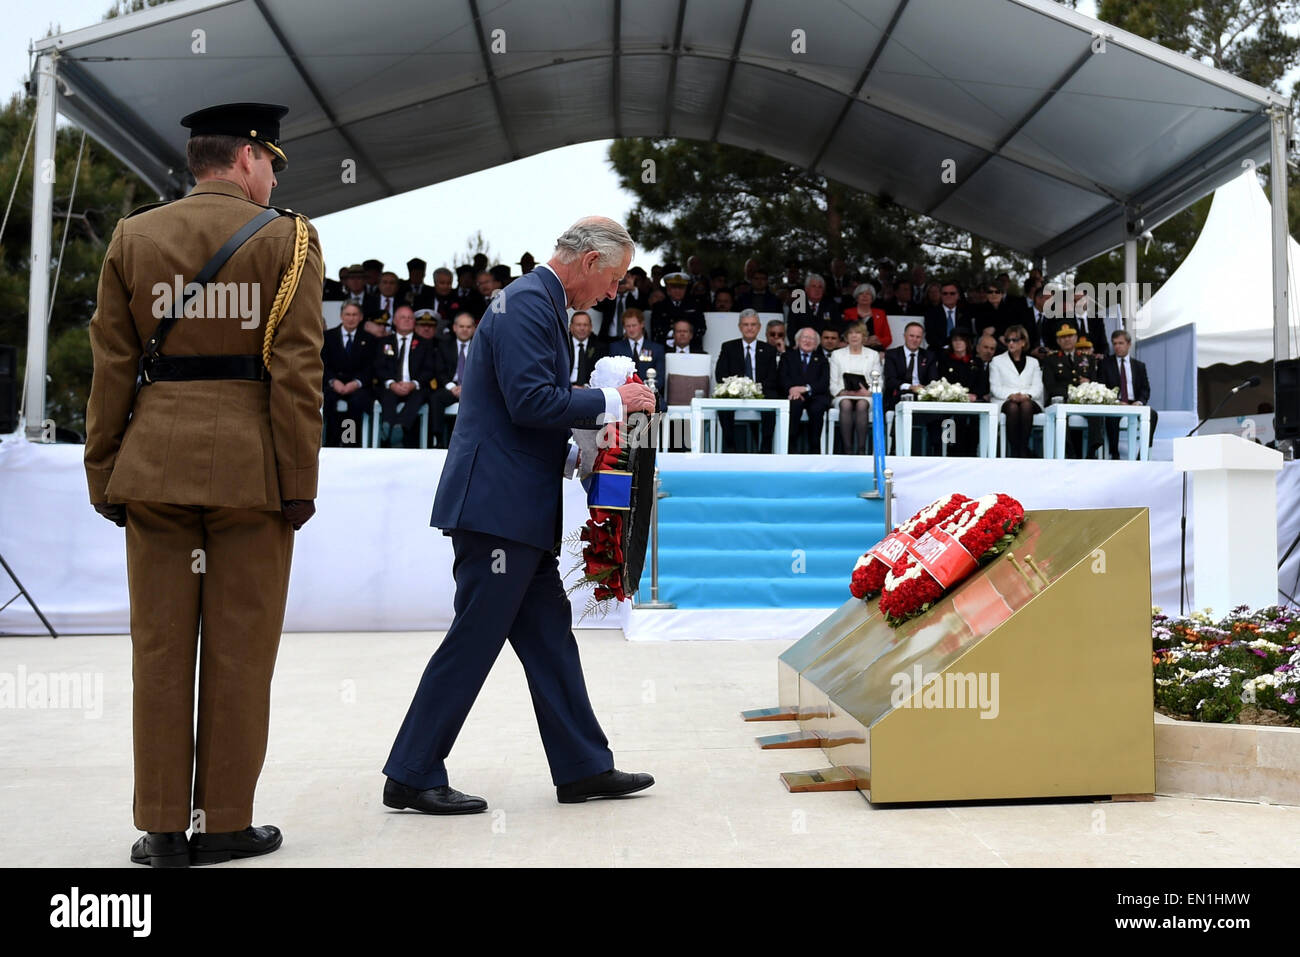 (150425) -- CANAKKALE, April 25, 2015(Xinhua) -- British Prince of Wales Charles presents a bouquet at Turkish memorial service in Canakkale, Turkey, April 25, 2015. Leaders and dignitaries from the UK, Ireland, Australia and New Zealand joined Turkish military delegates to attend Turkish memorial service on Saturday at the 57th Infantry Regiment Memorial, as an event of 100th anniversary of the Gallipoli Battle. (Xinhua/He Canling) Stock Photo